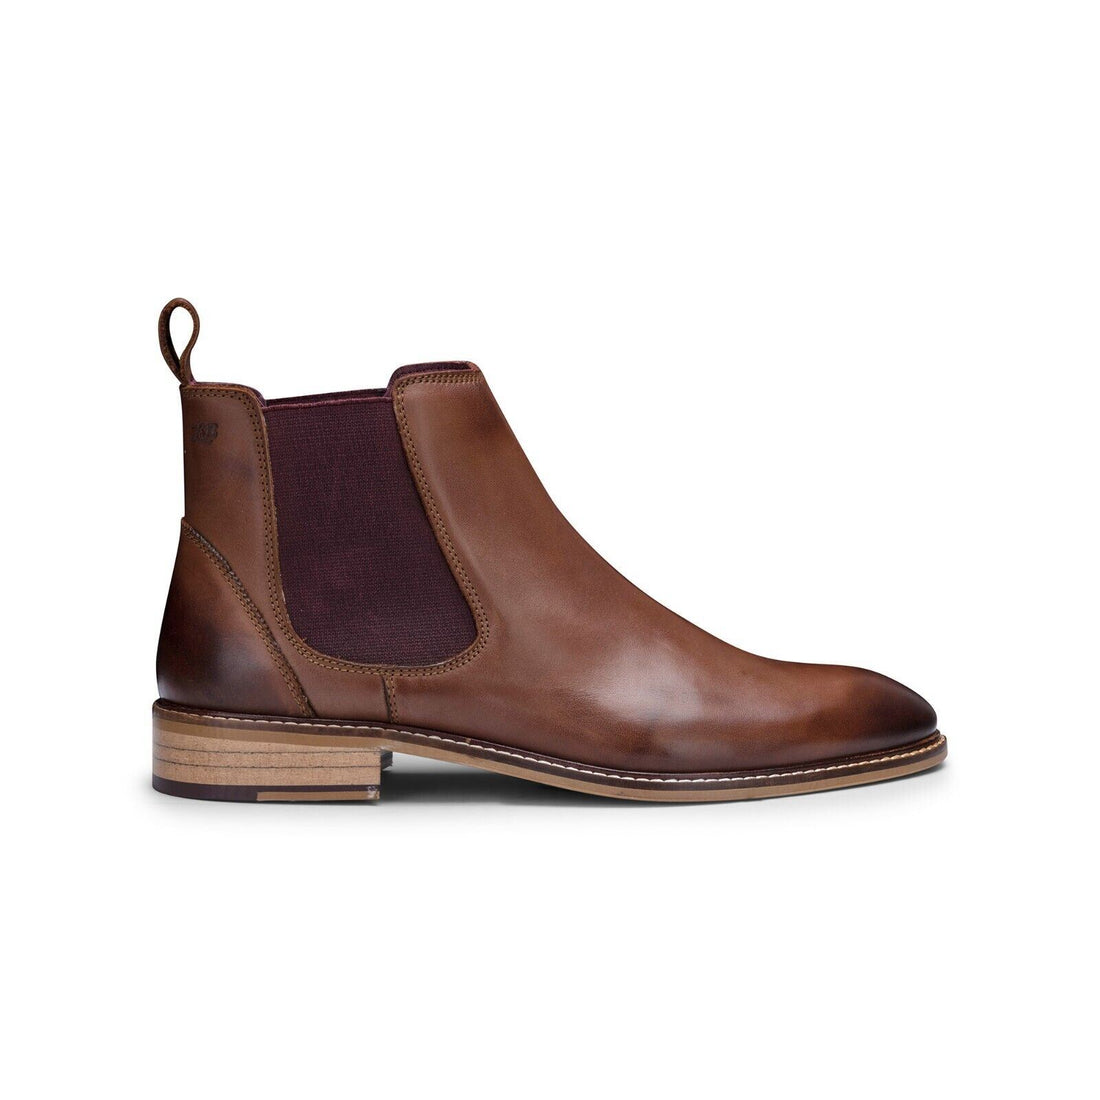 Mens Chestnut-Brown Leather Classic Chelsea Boots